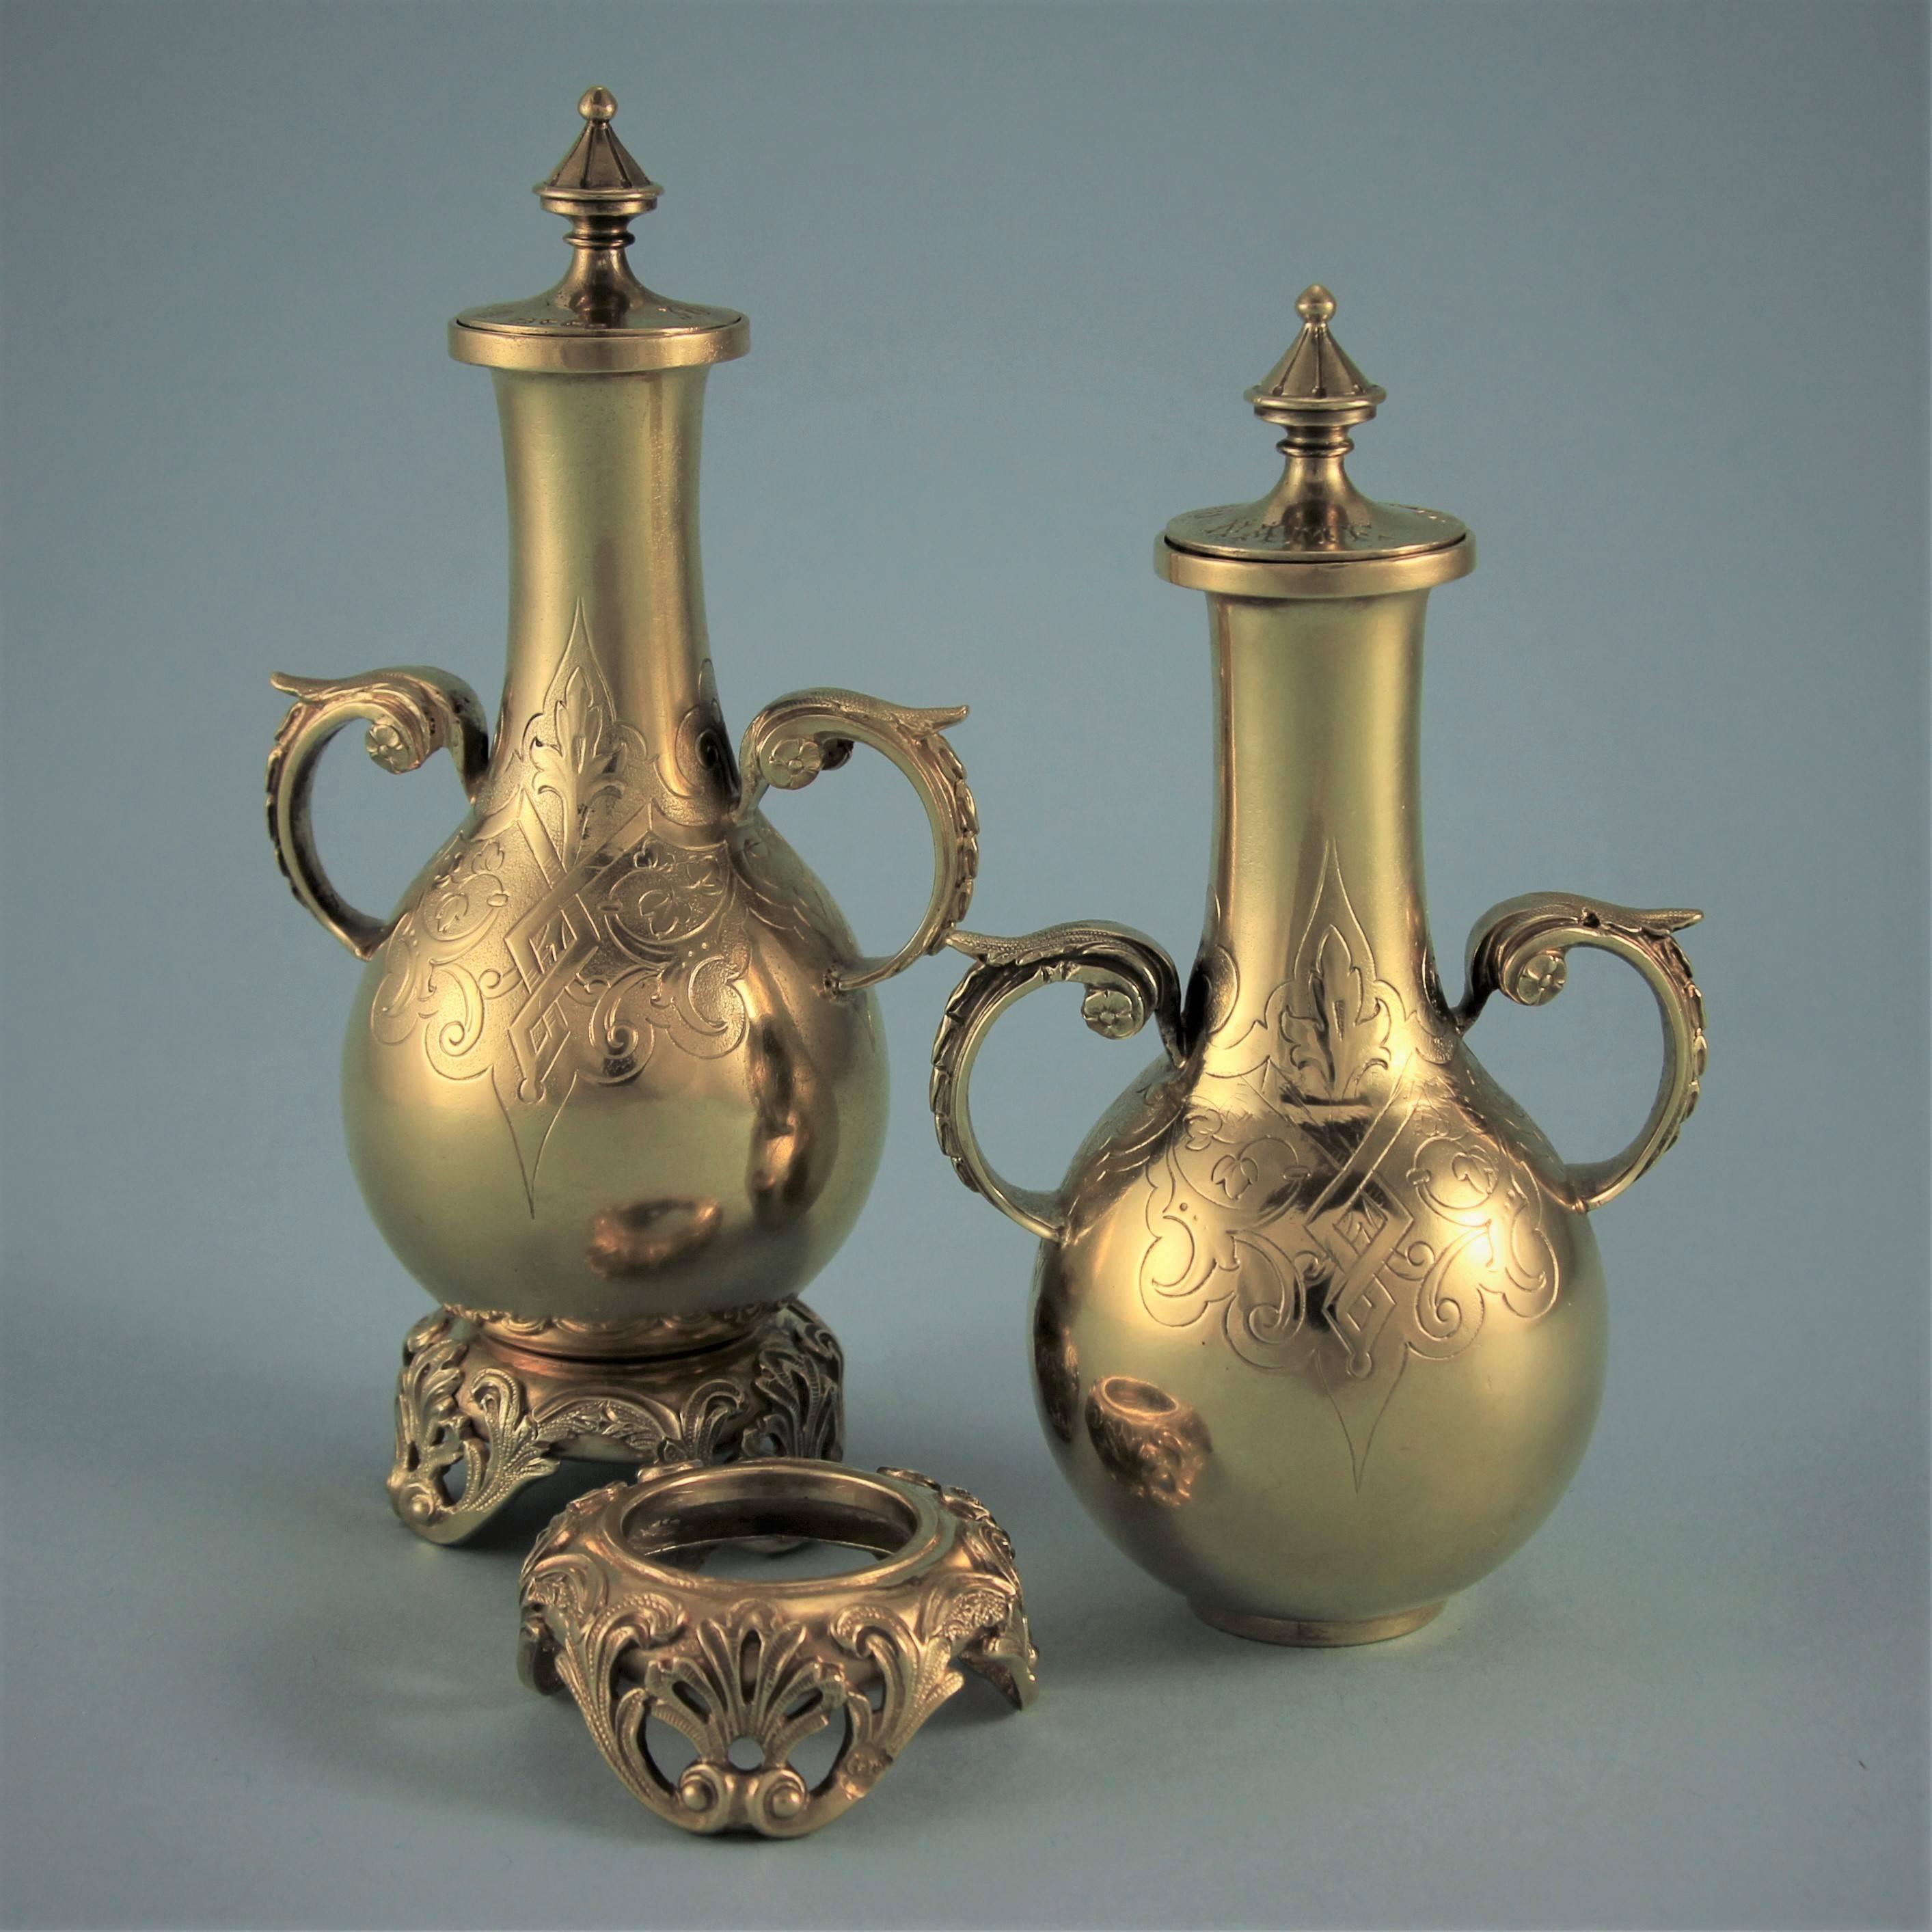 Unusual pair of Victorian silver gilt perfume bottles on stands with an Oriental flavour. 
Maker: George Fox. London, 1871. 

These bottles are extremely well made as one would expect from this maker. The cork on the pull off lids is tipped with